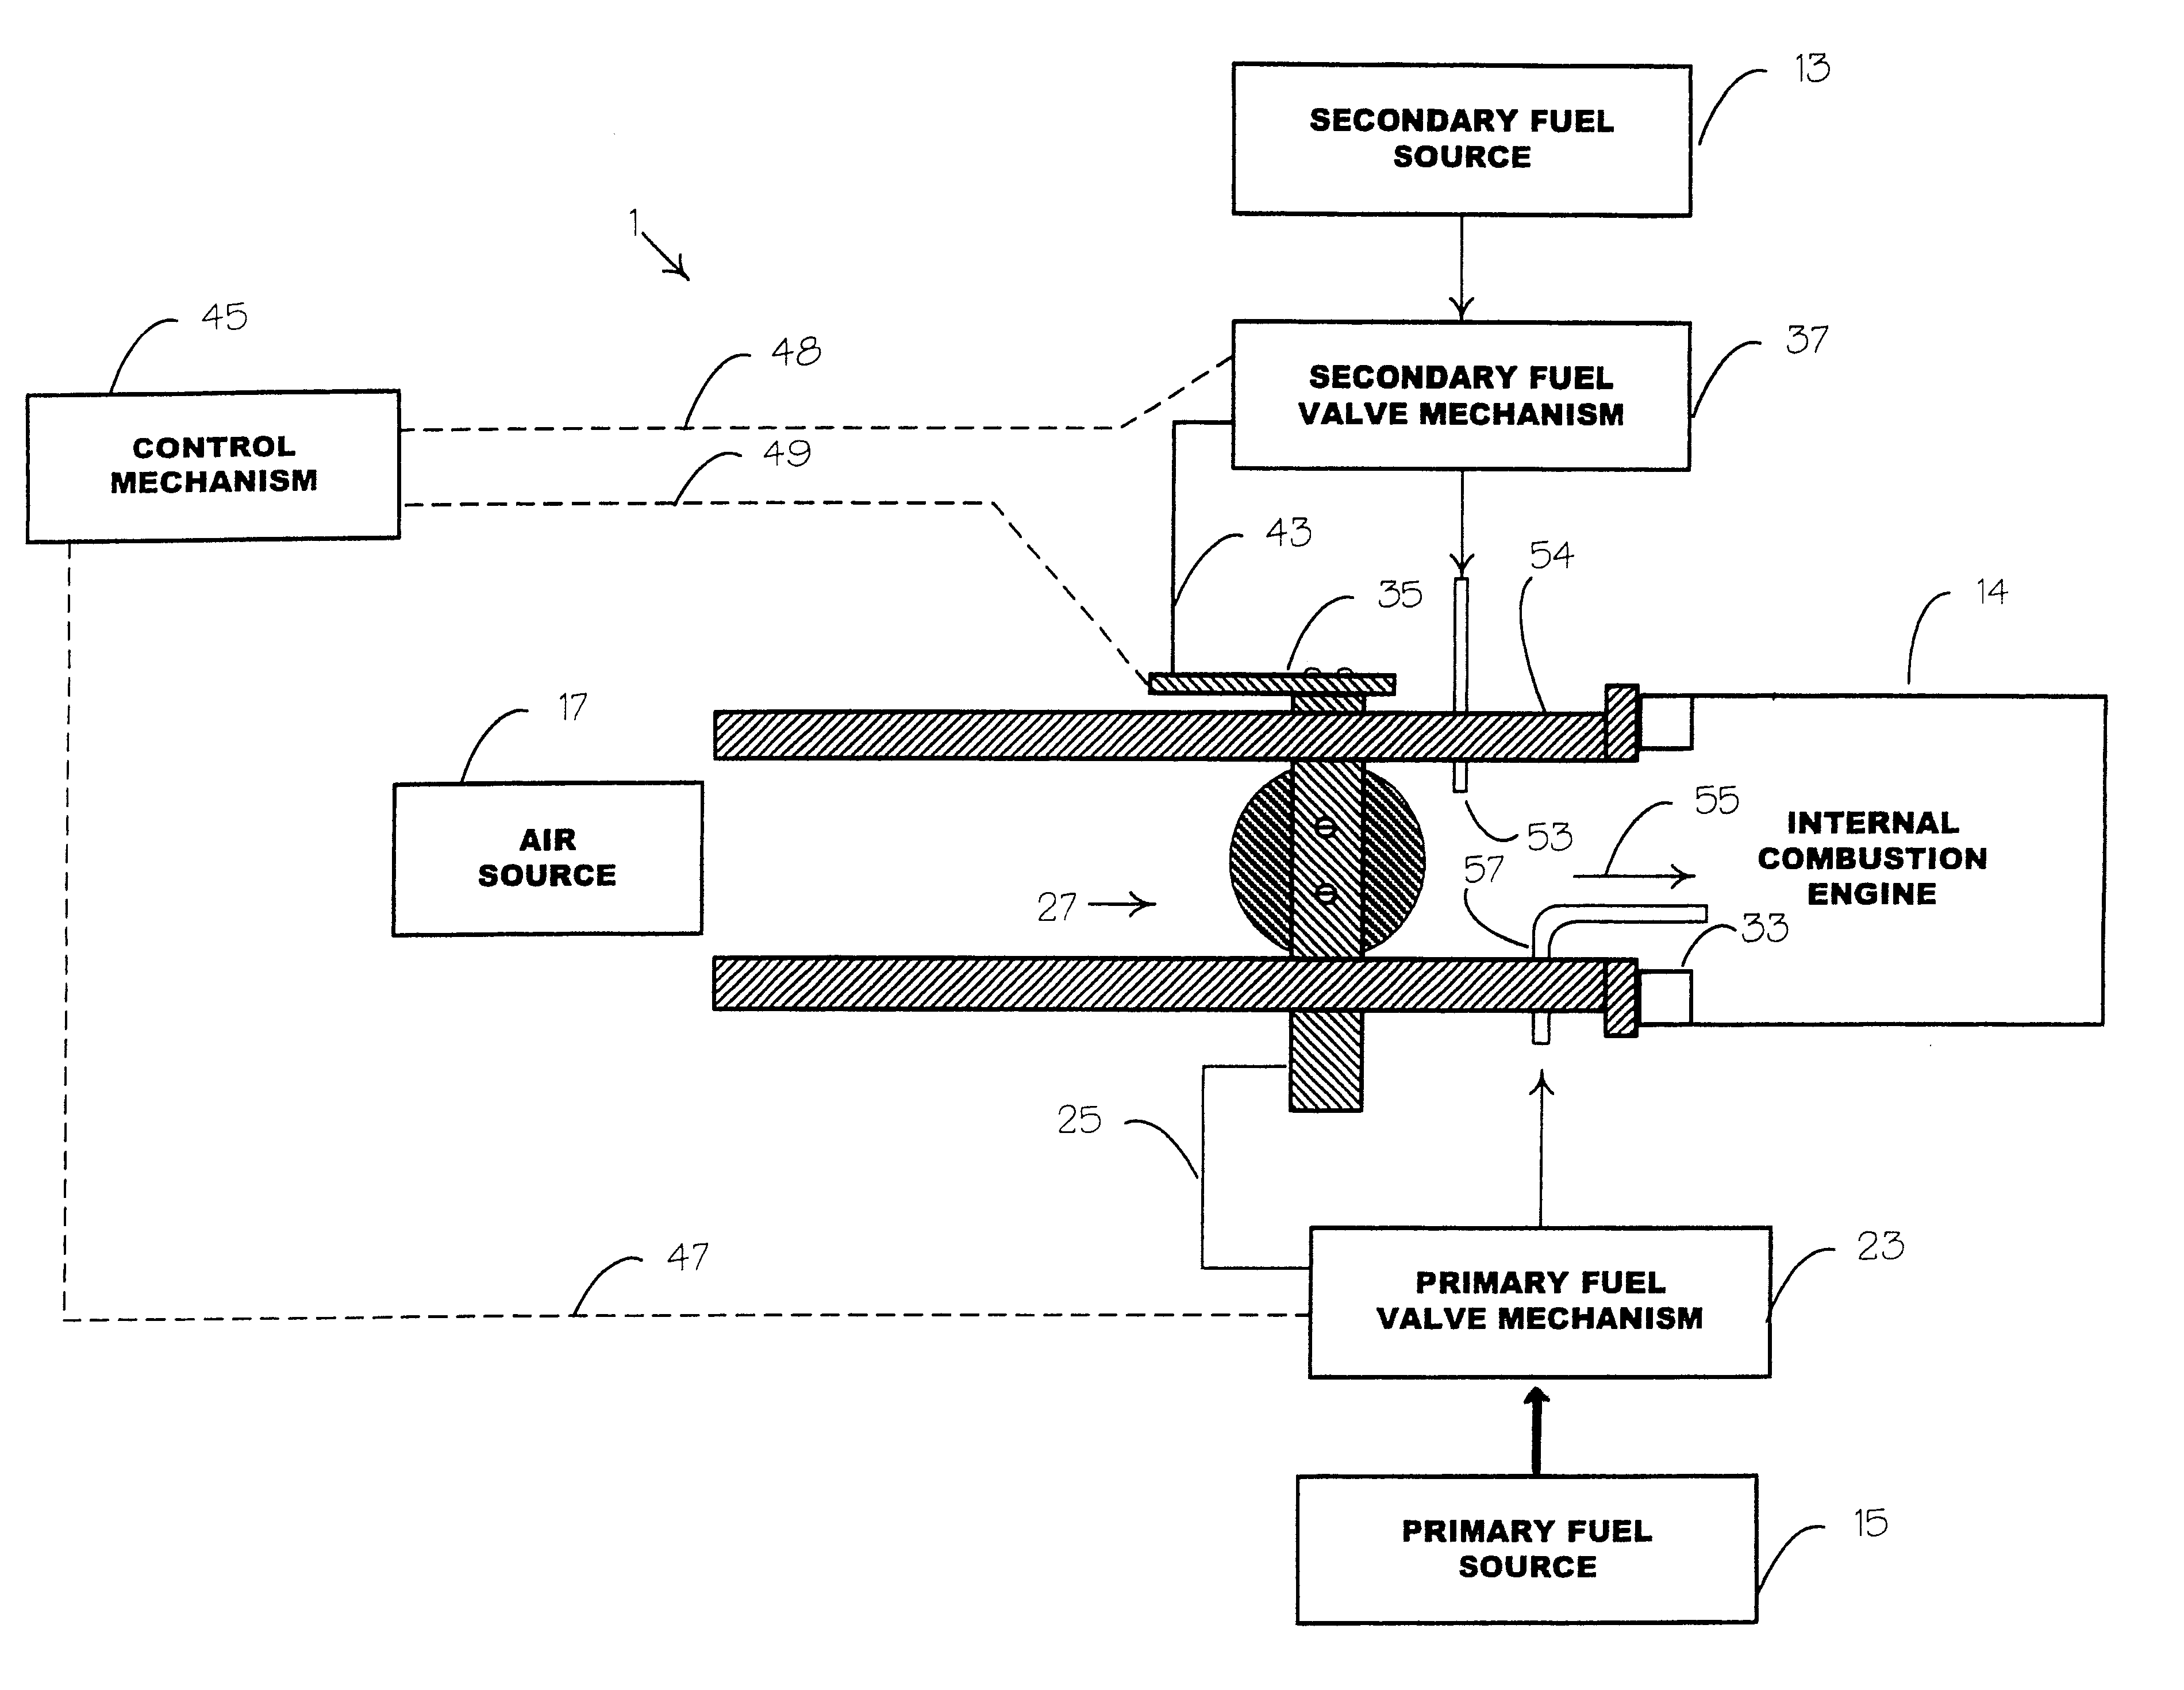 Internal combustion system adapted for use of a dual fuel composition including acetylene